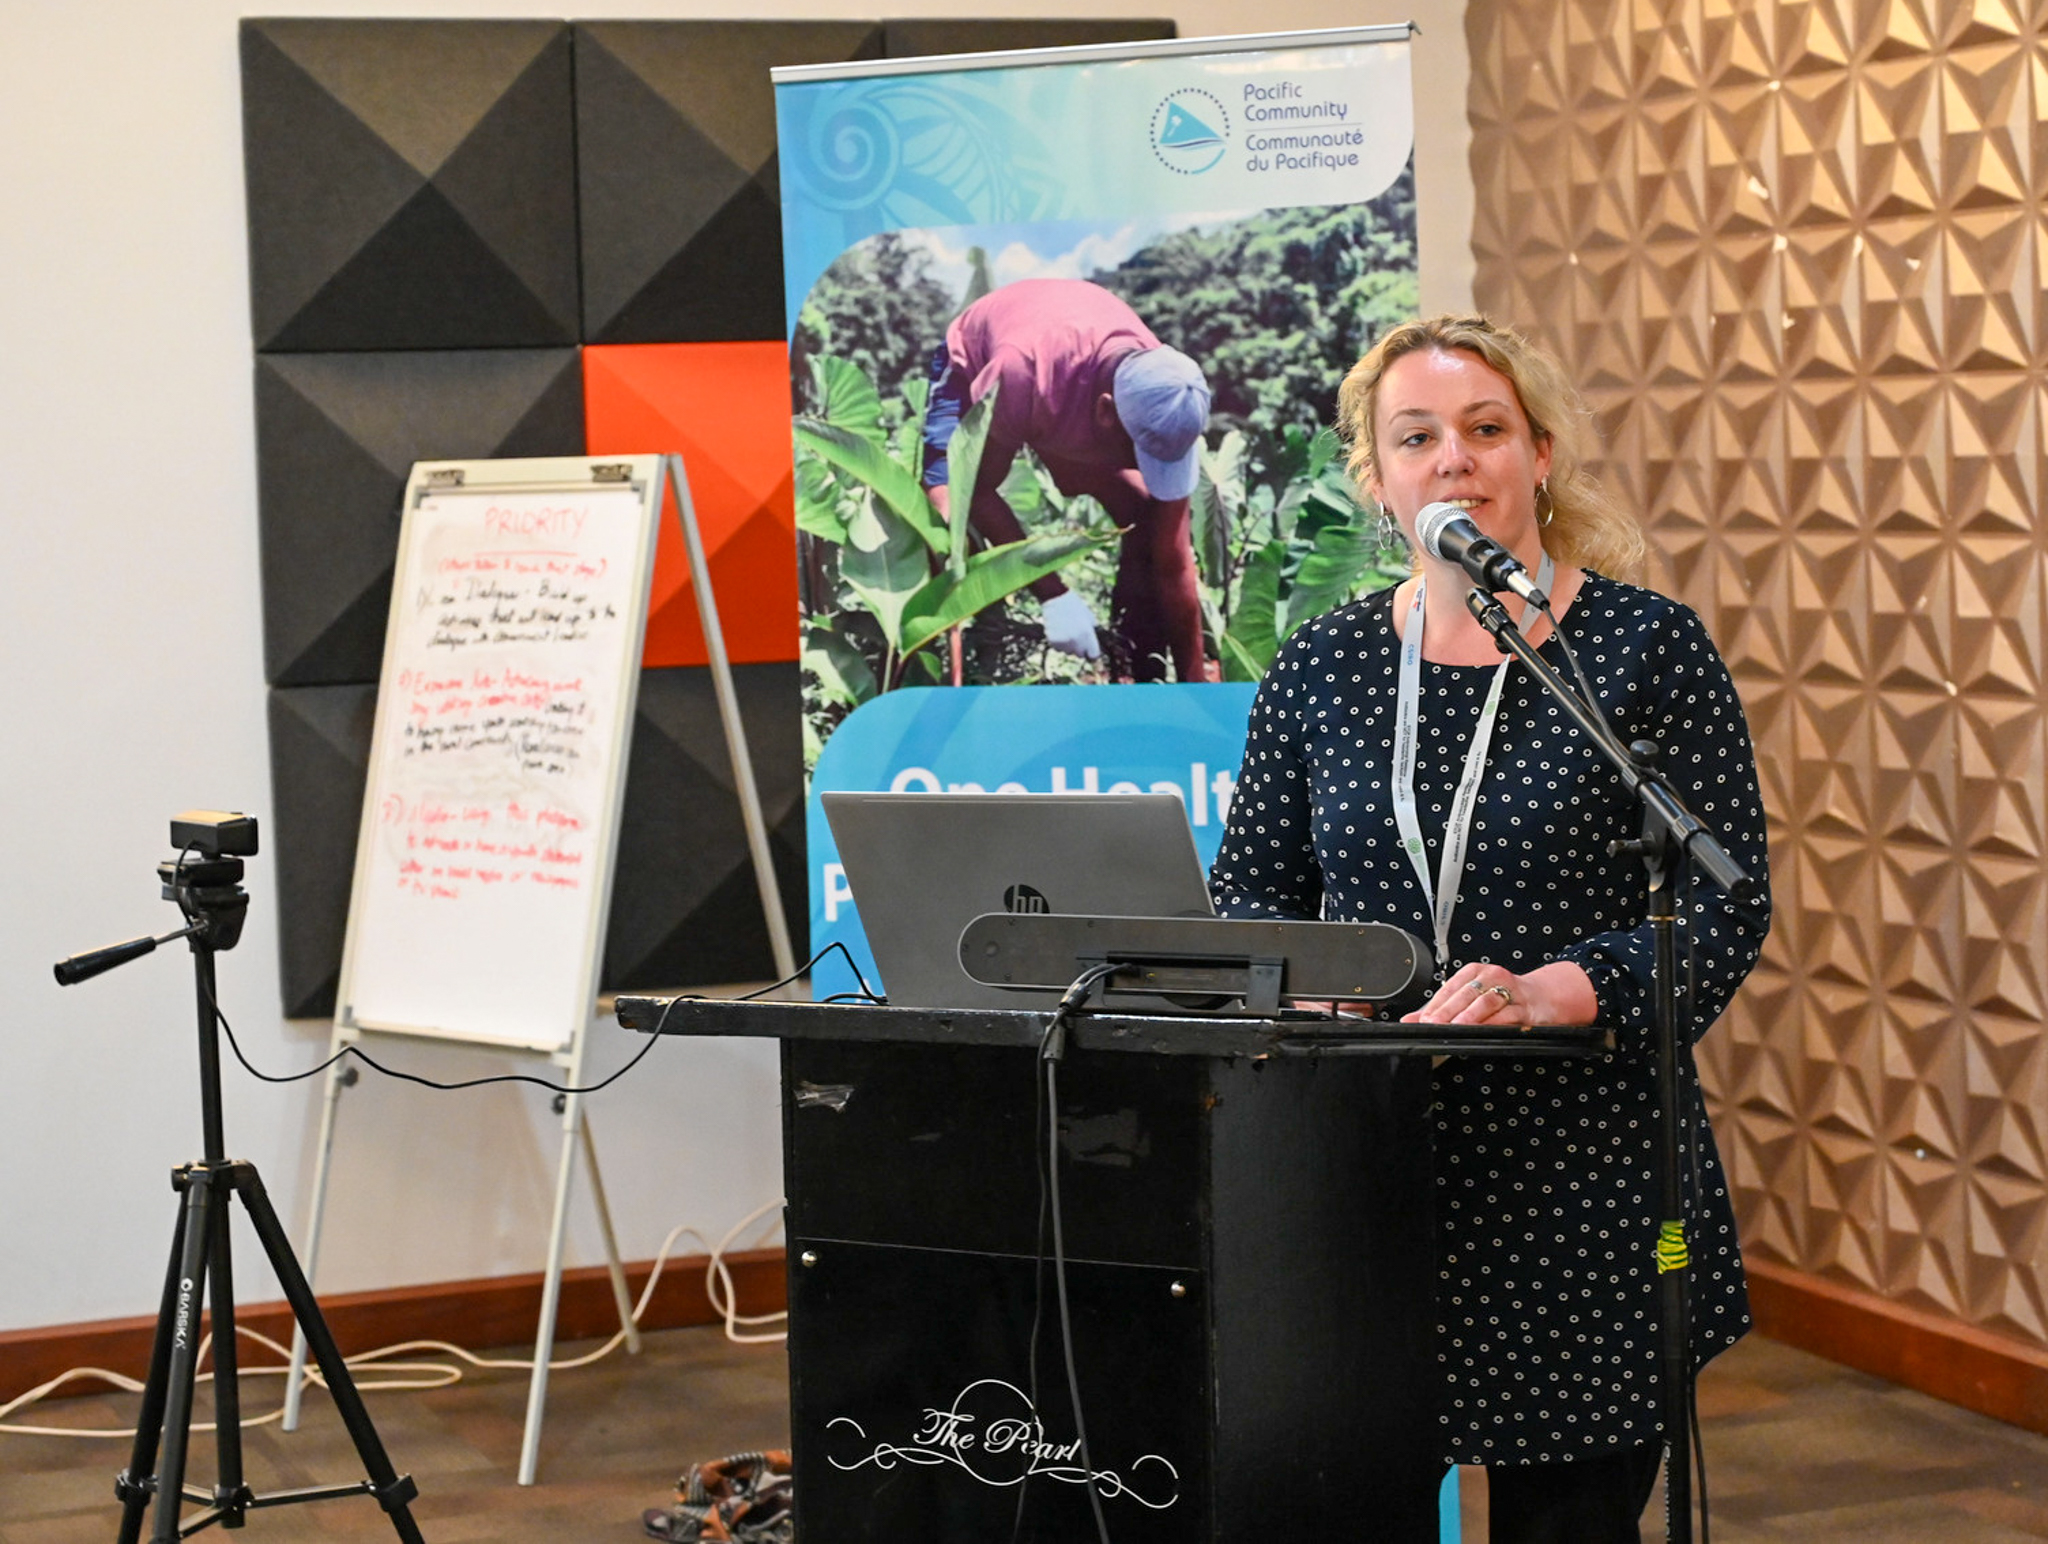 ACIAR Research Program Manager for Livestock Systems, Dr Anna Okello, said ACIAR was proud to support AMR strengthening initiatives in the region.